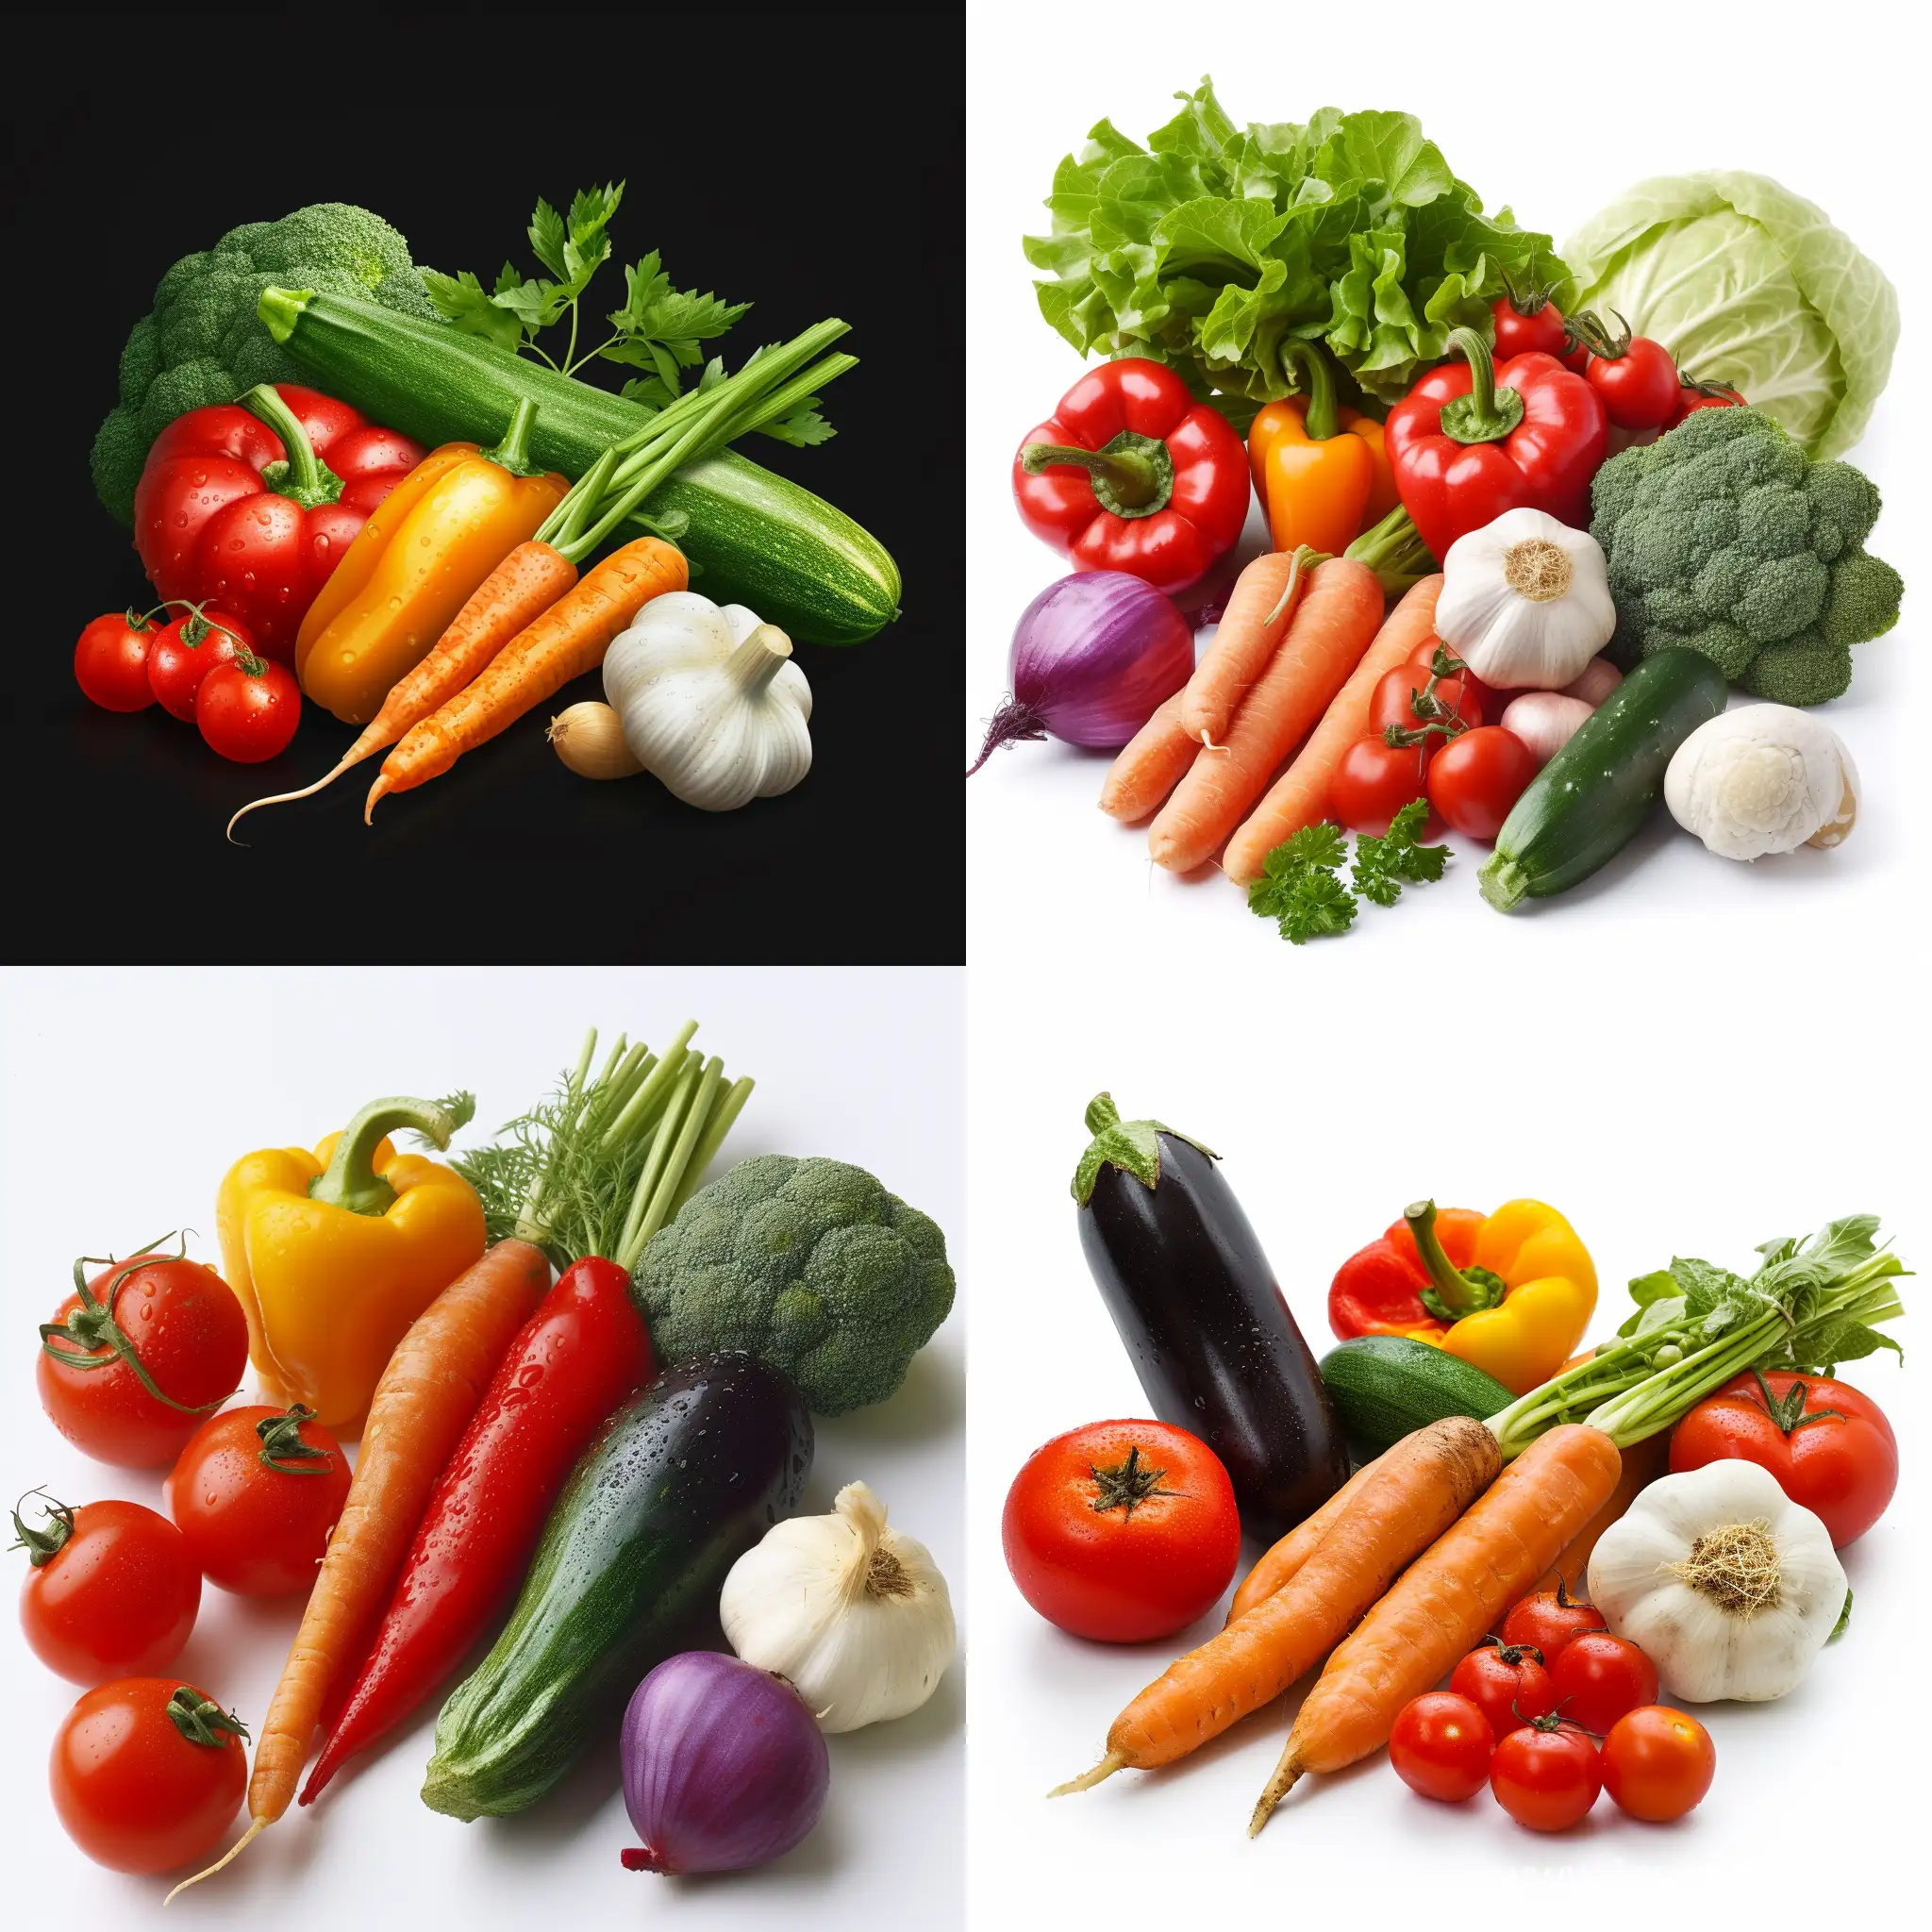 Fresh-and-Vibrant-Vegetables-Realistic-Photo-Composition